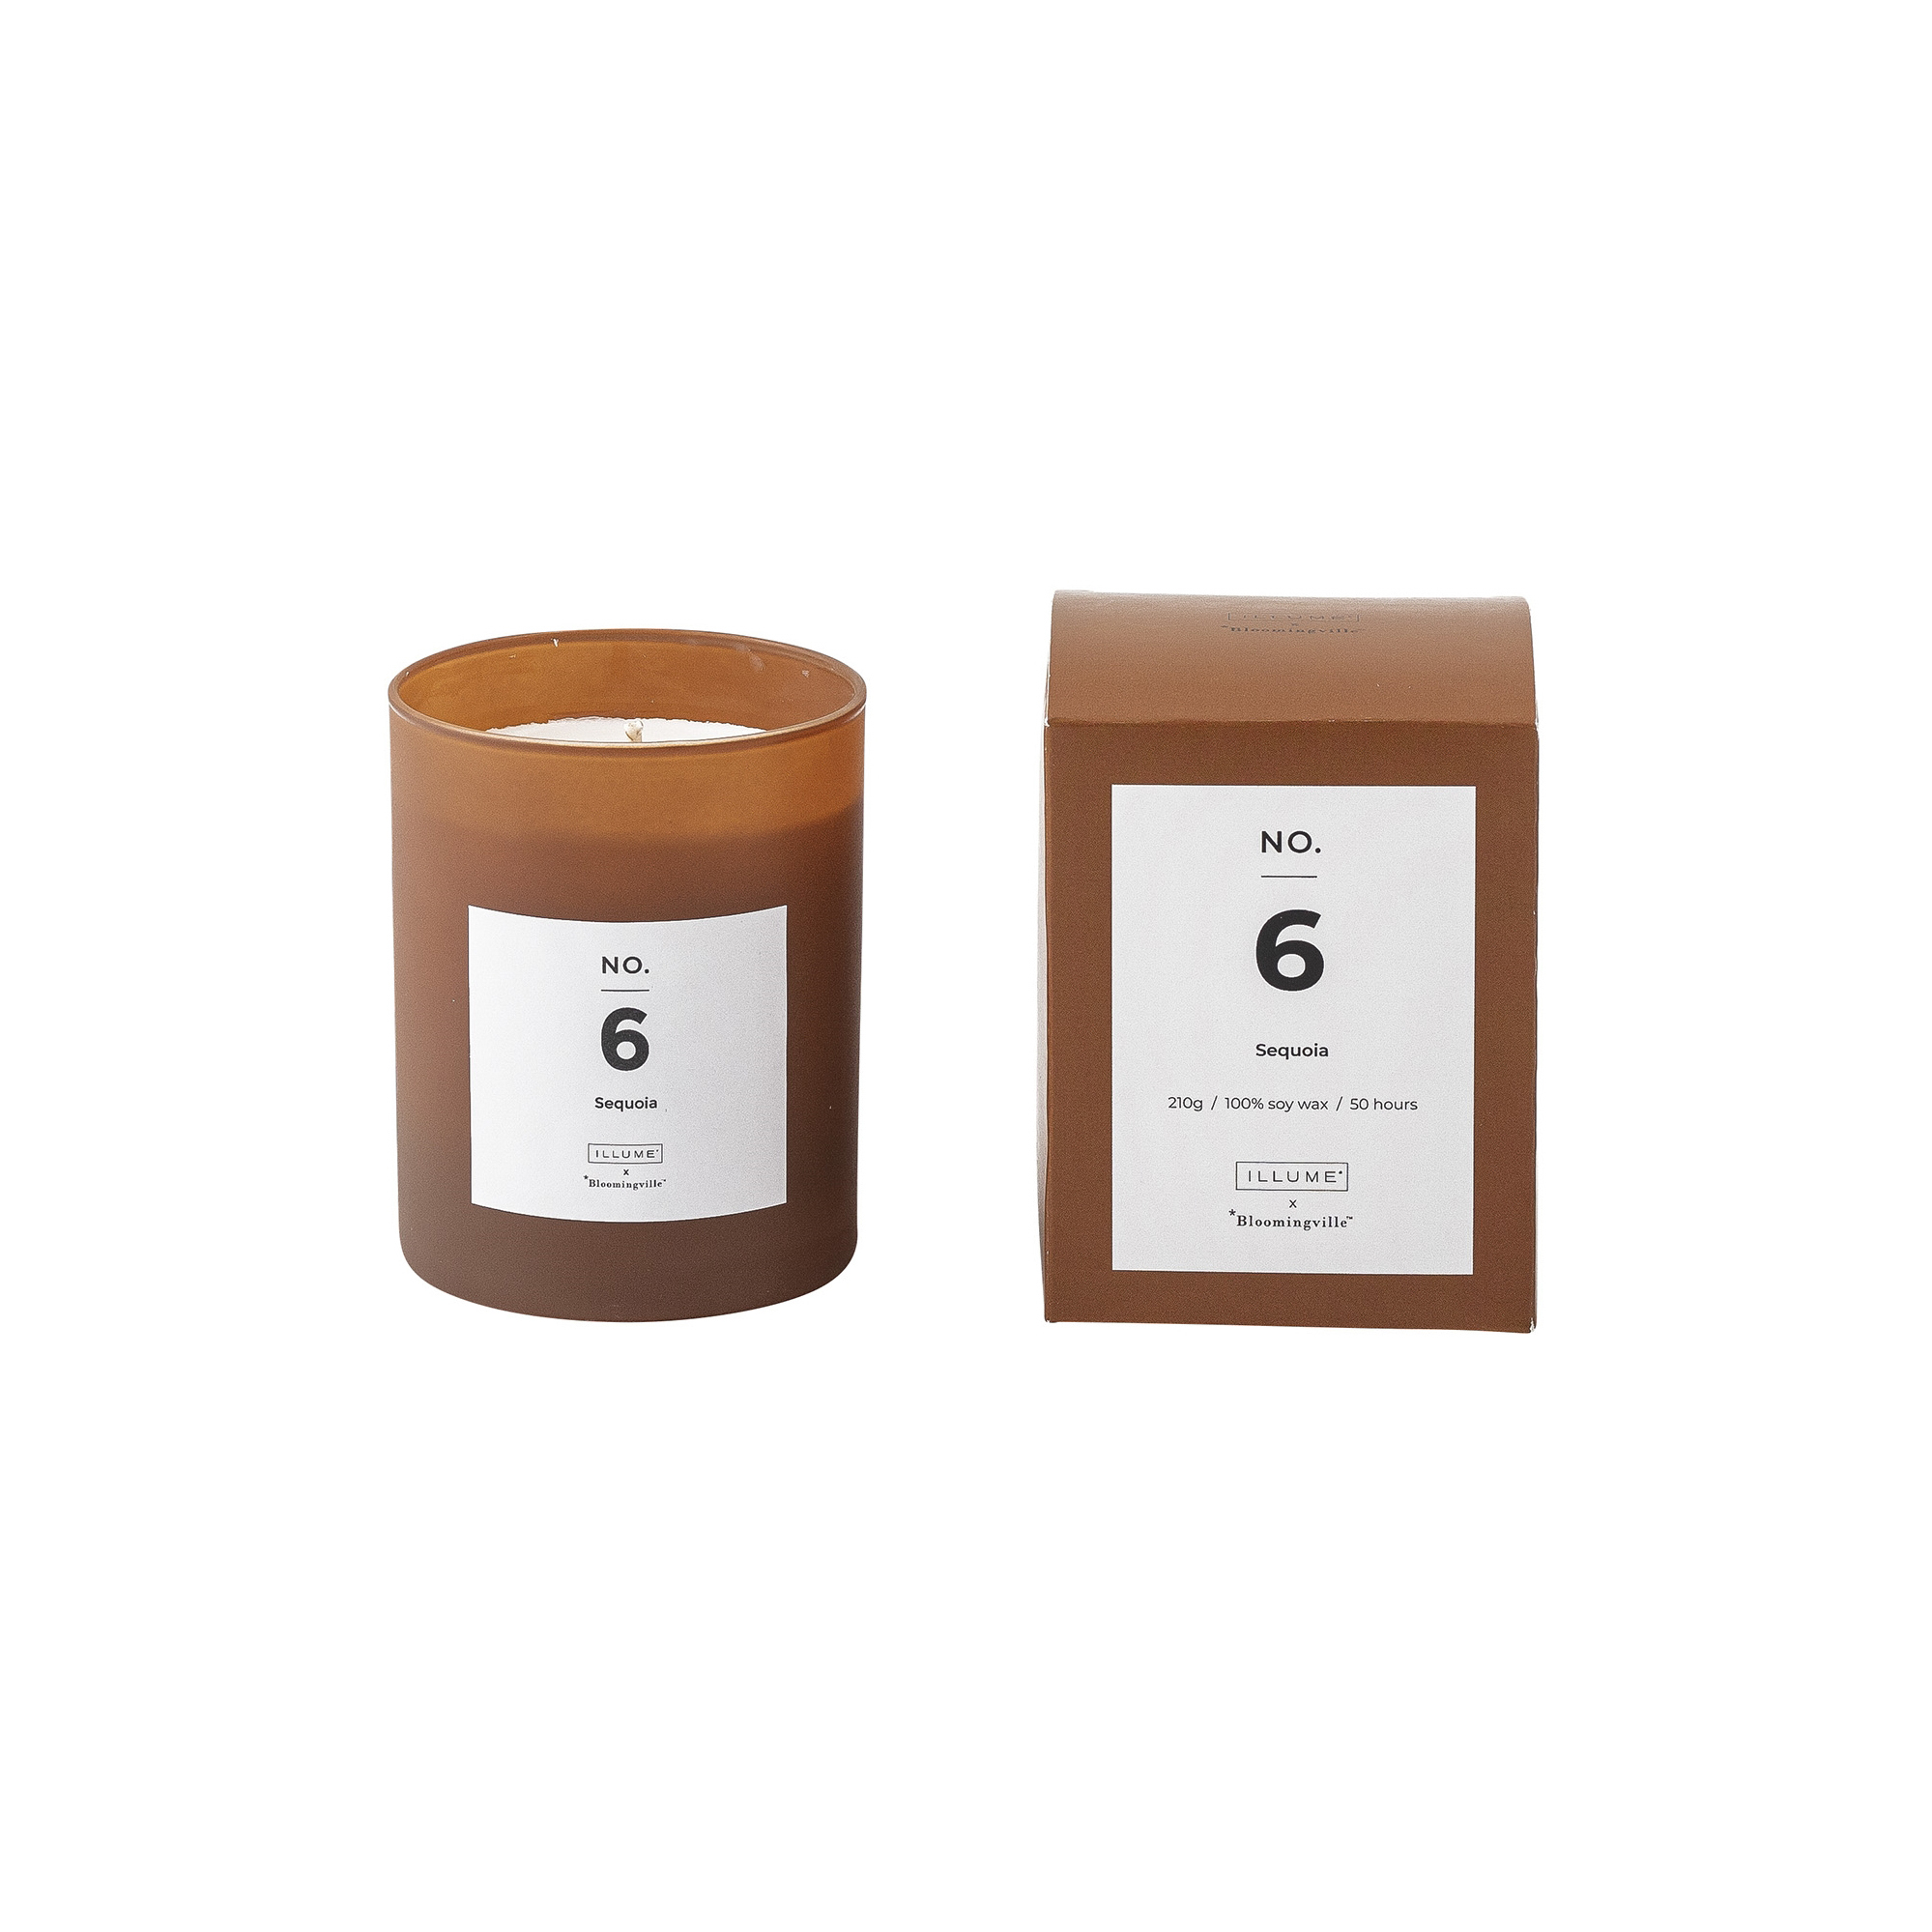 No. 6 Sequoia Scented Candle